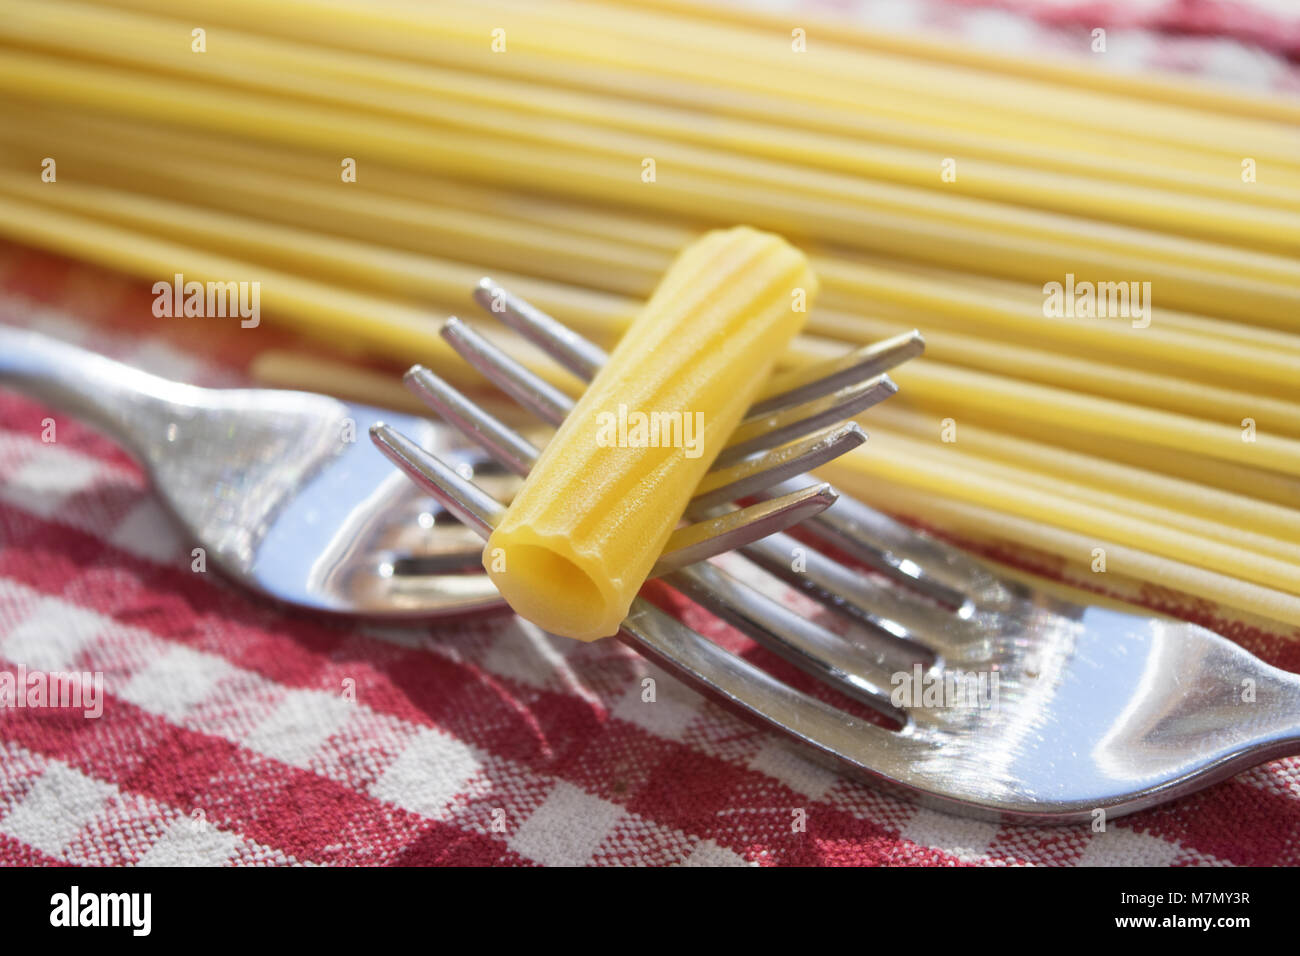 grain of raw riigatoni pasta put between two intertwined forks Stock Photo